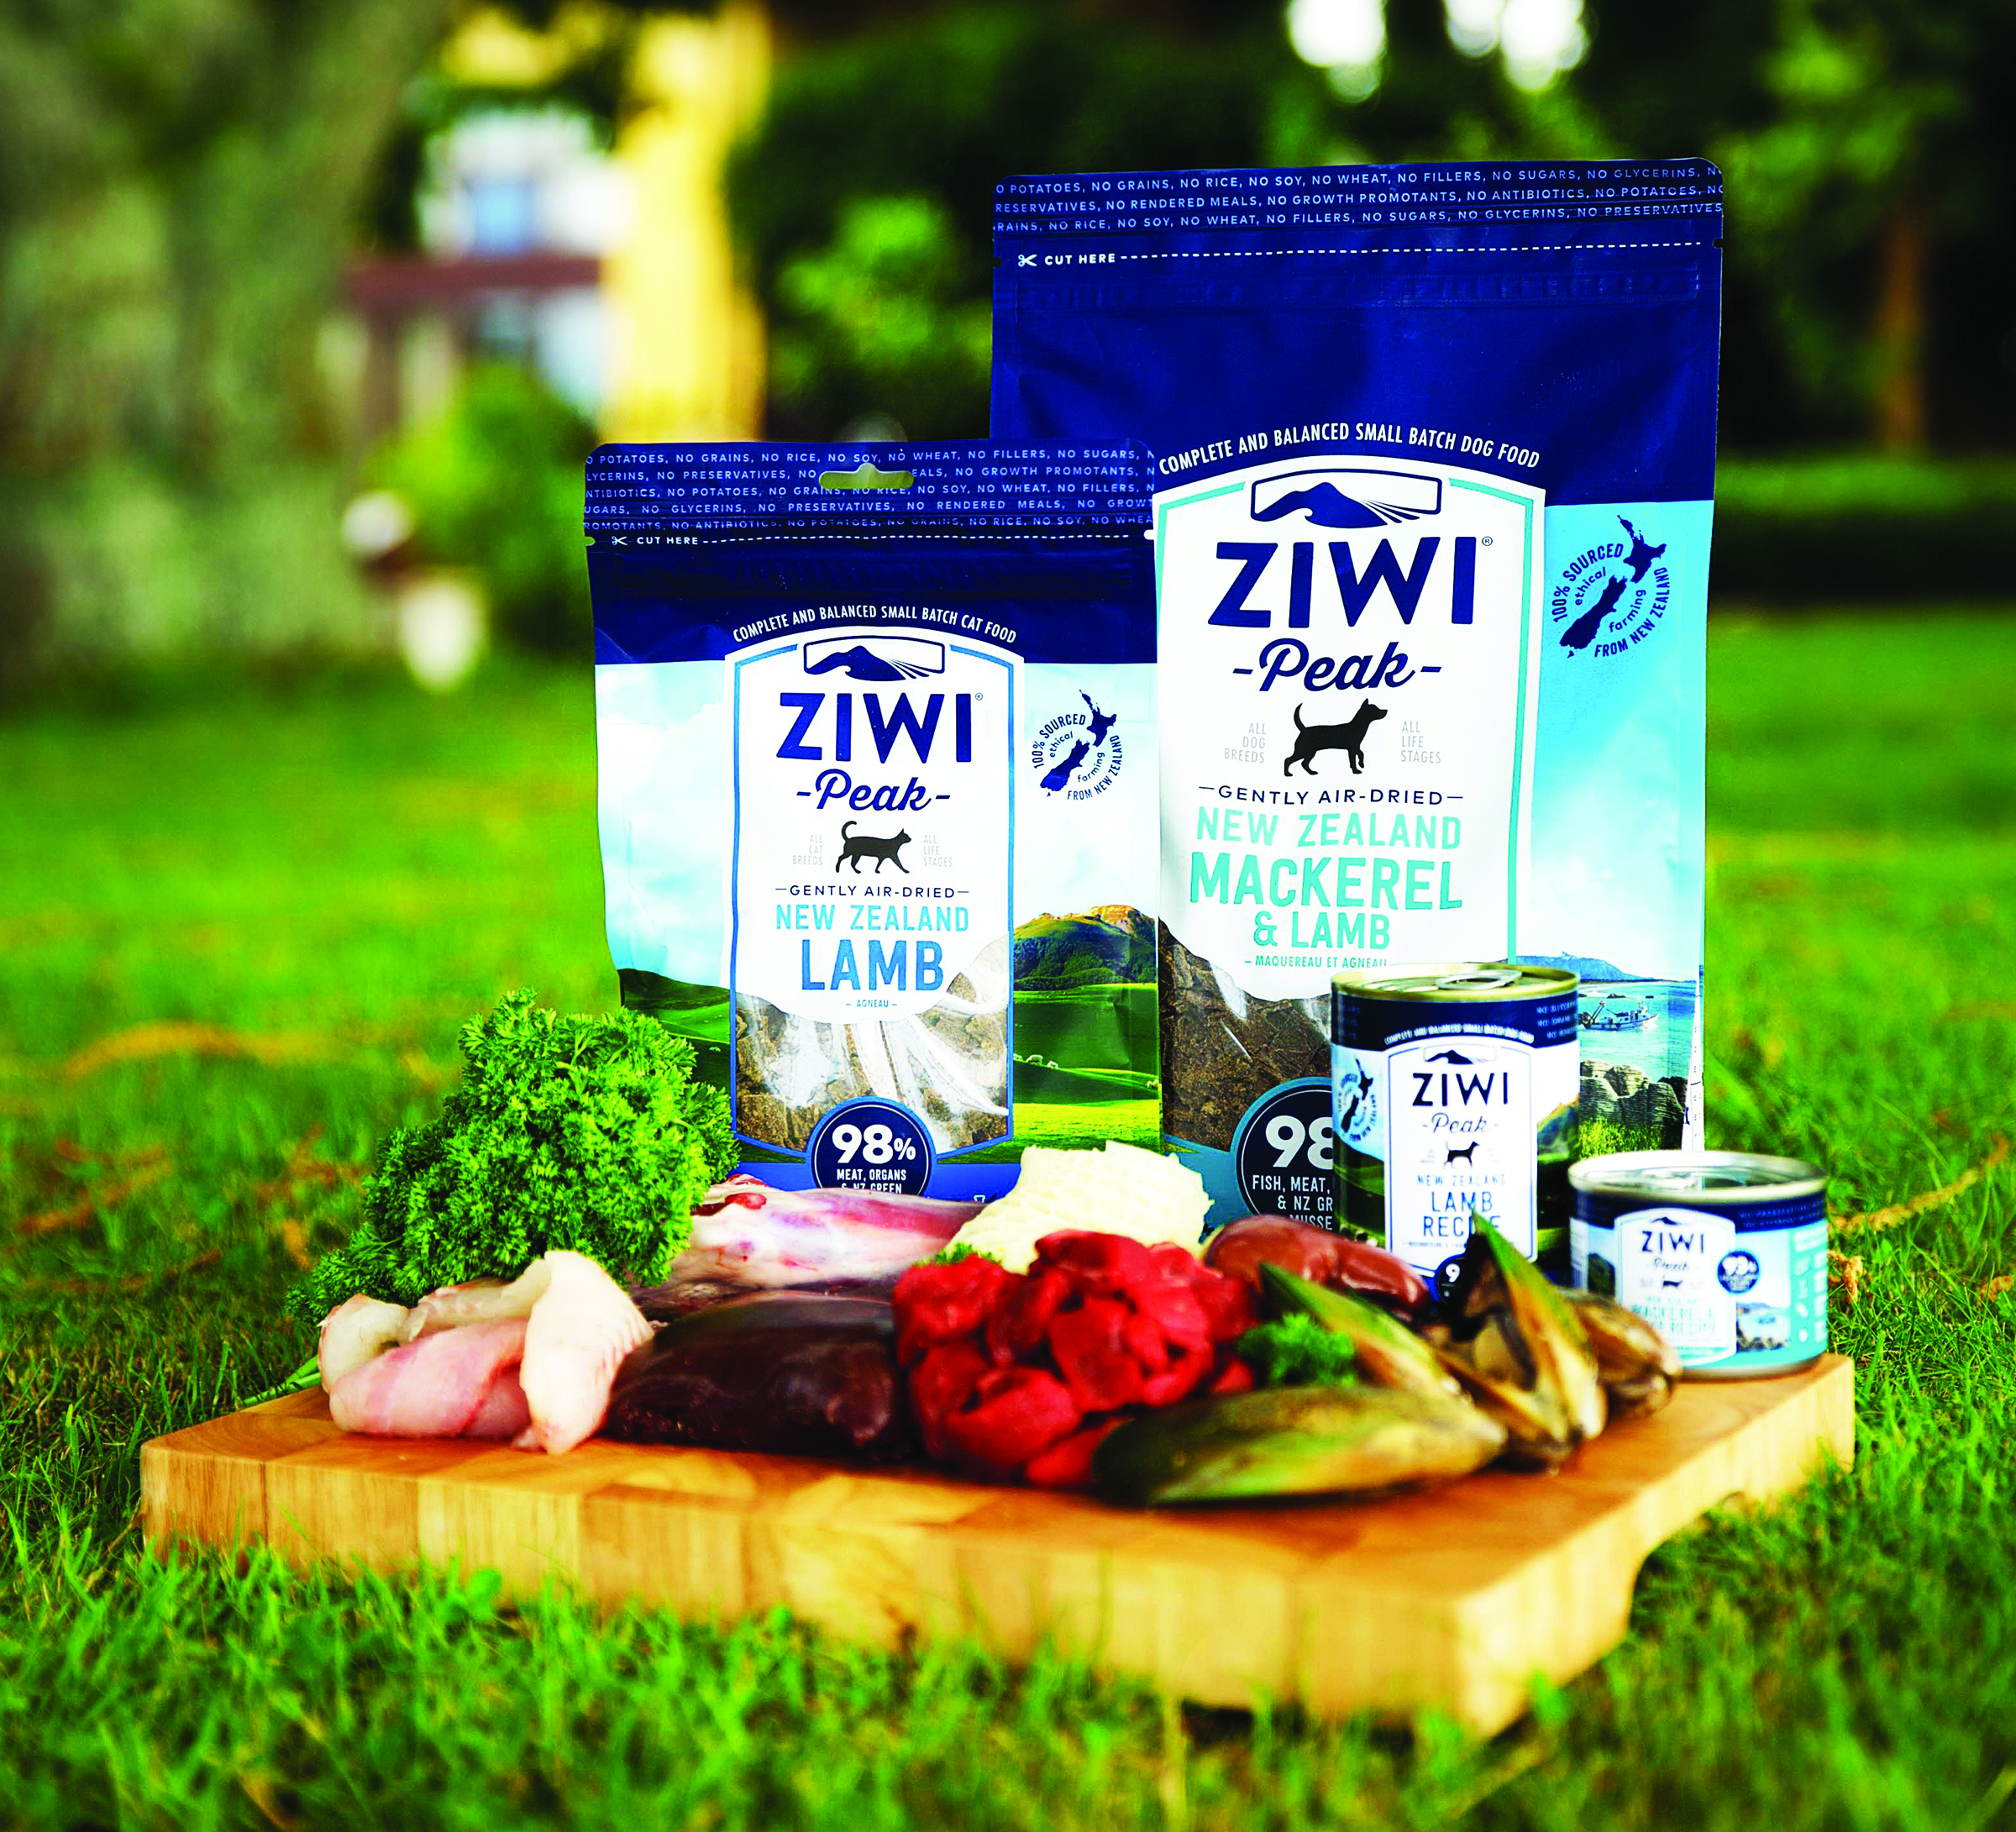 Ziwi Peak cat and dog food products